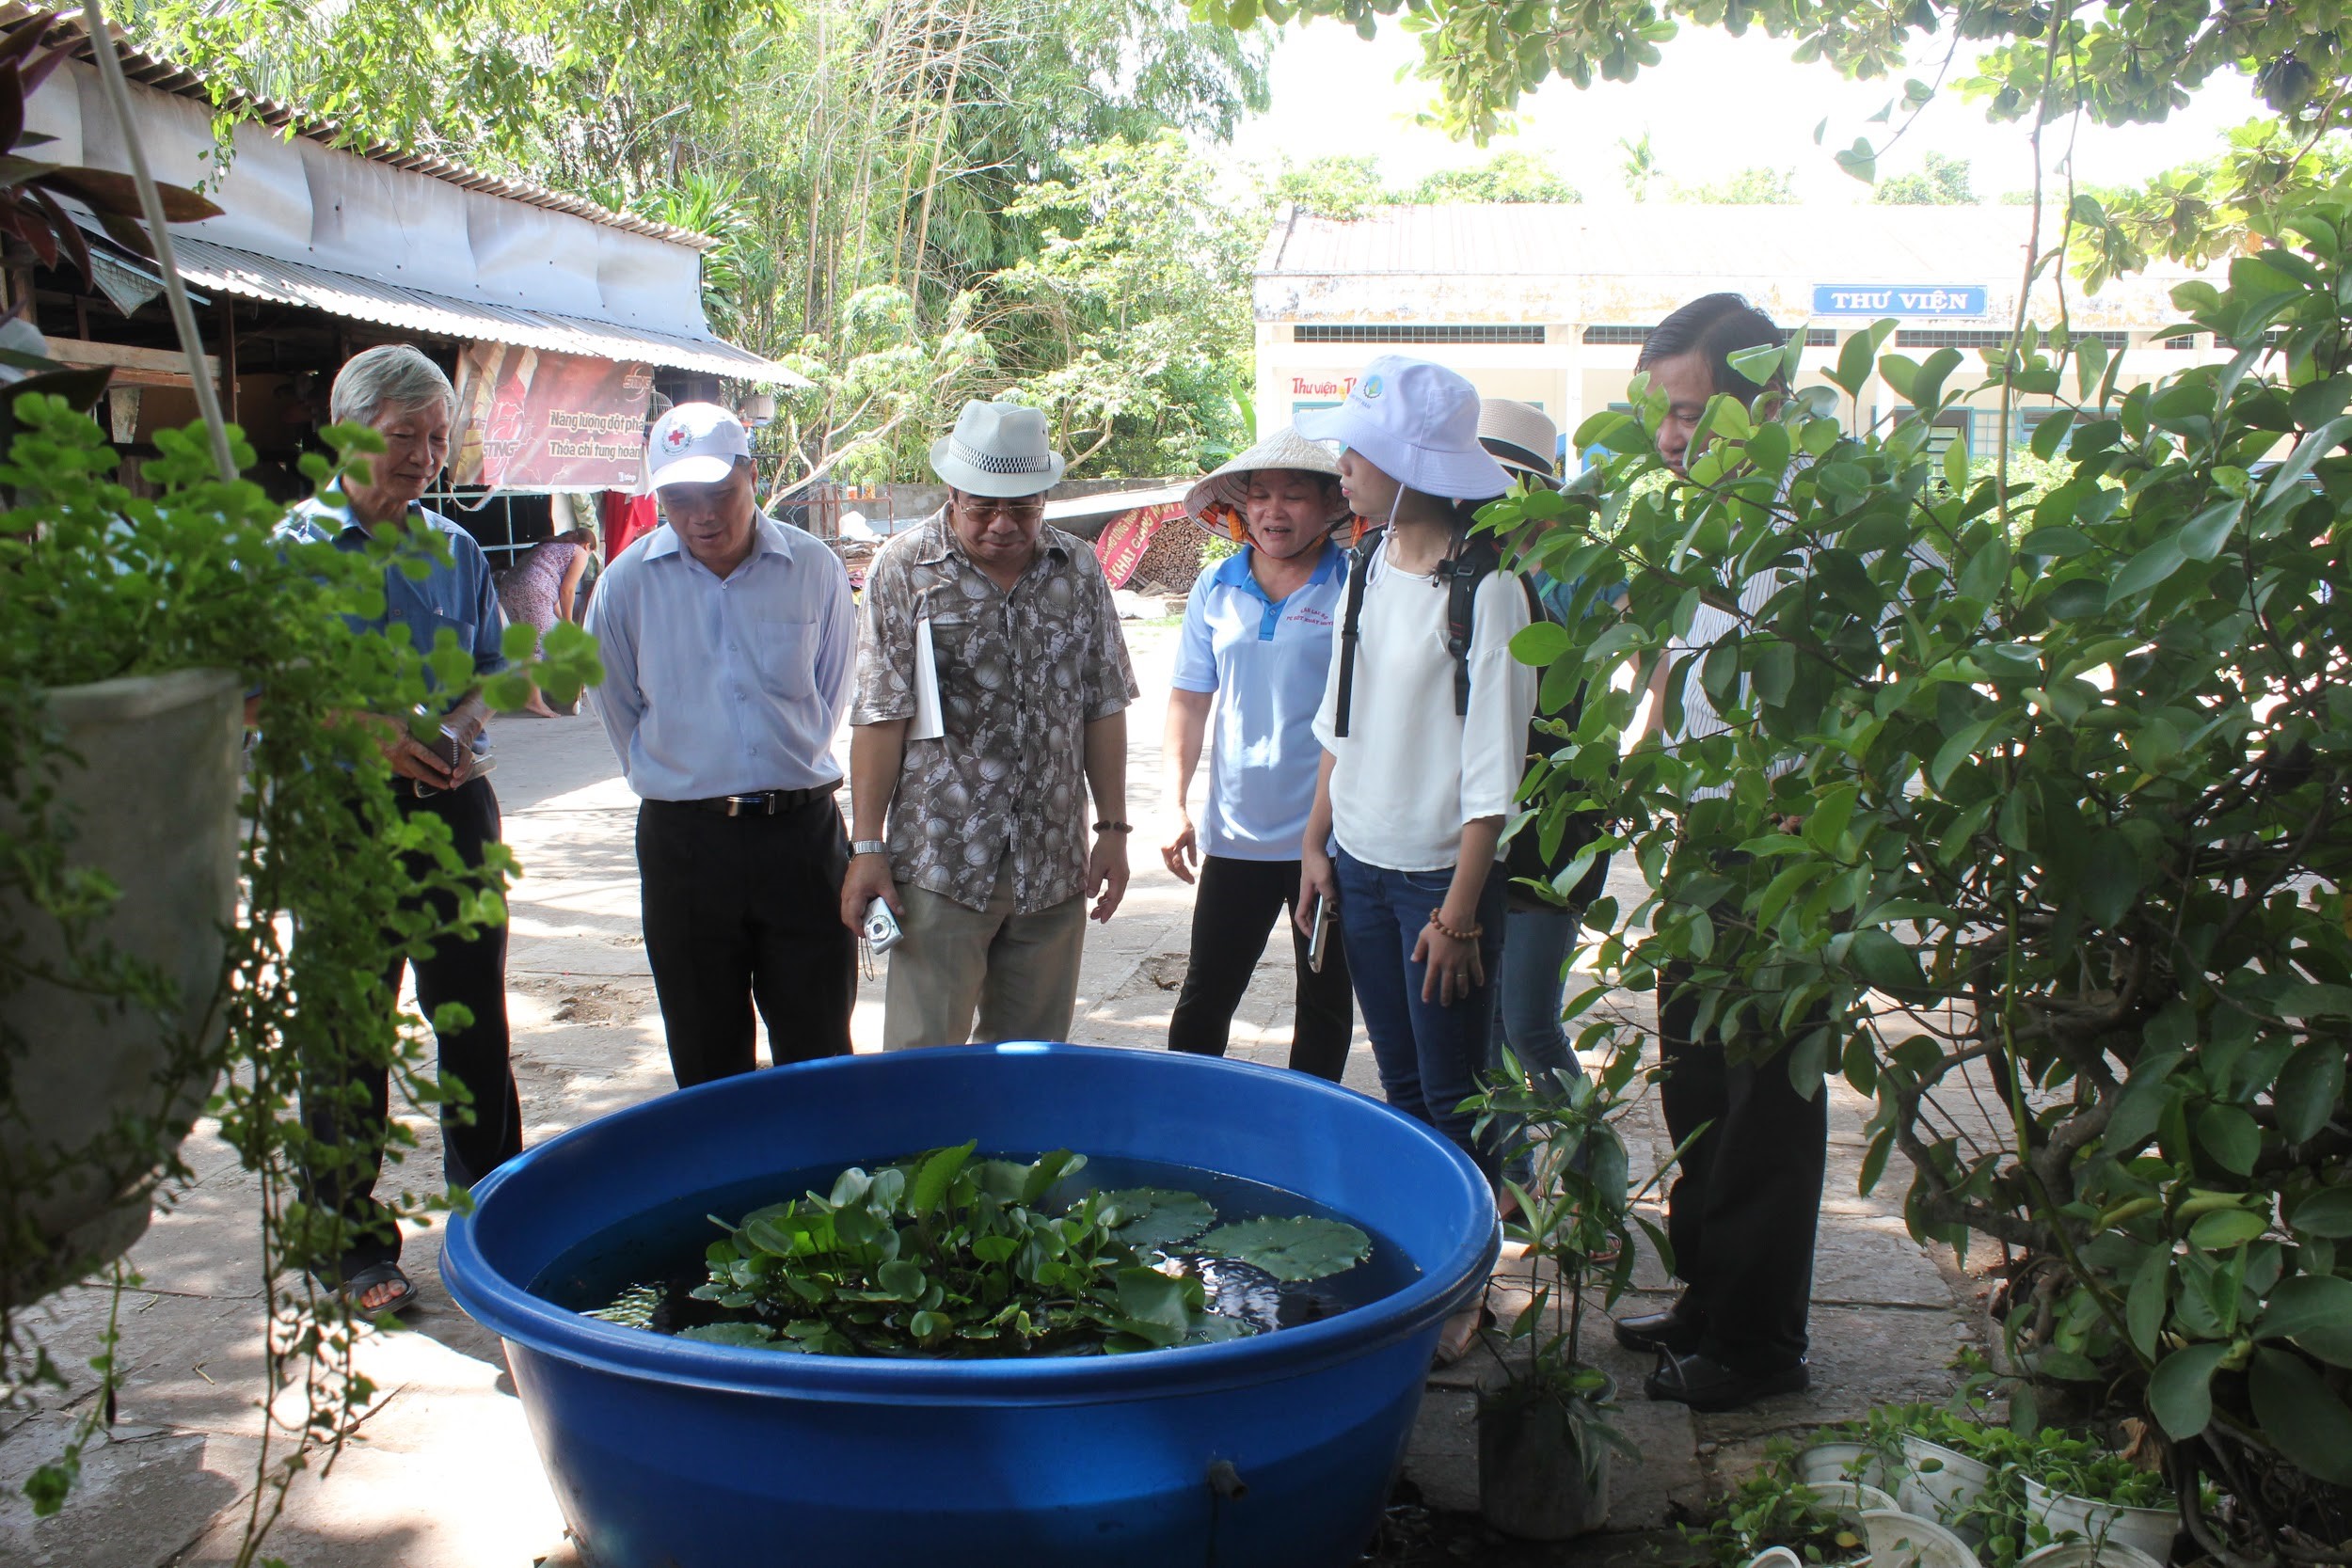 Fish farming instruction at a school. (Photo courtesy of Nguyen Van Viet/Can Tho Preventive Health Centre)